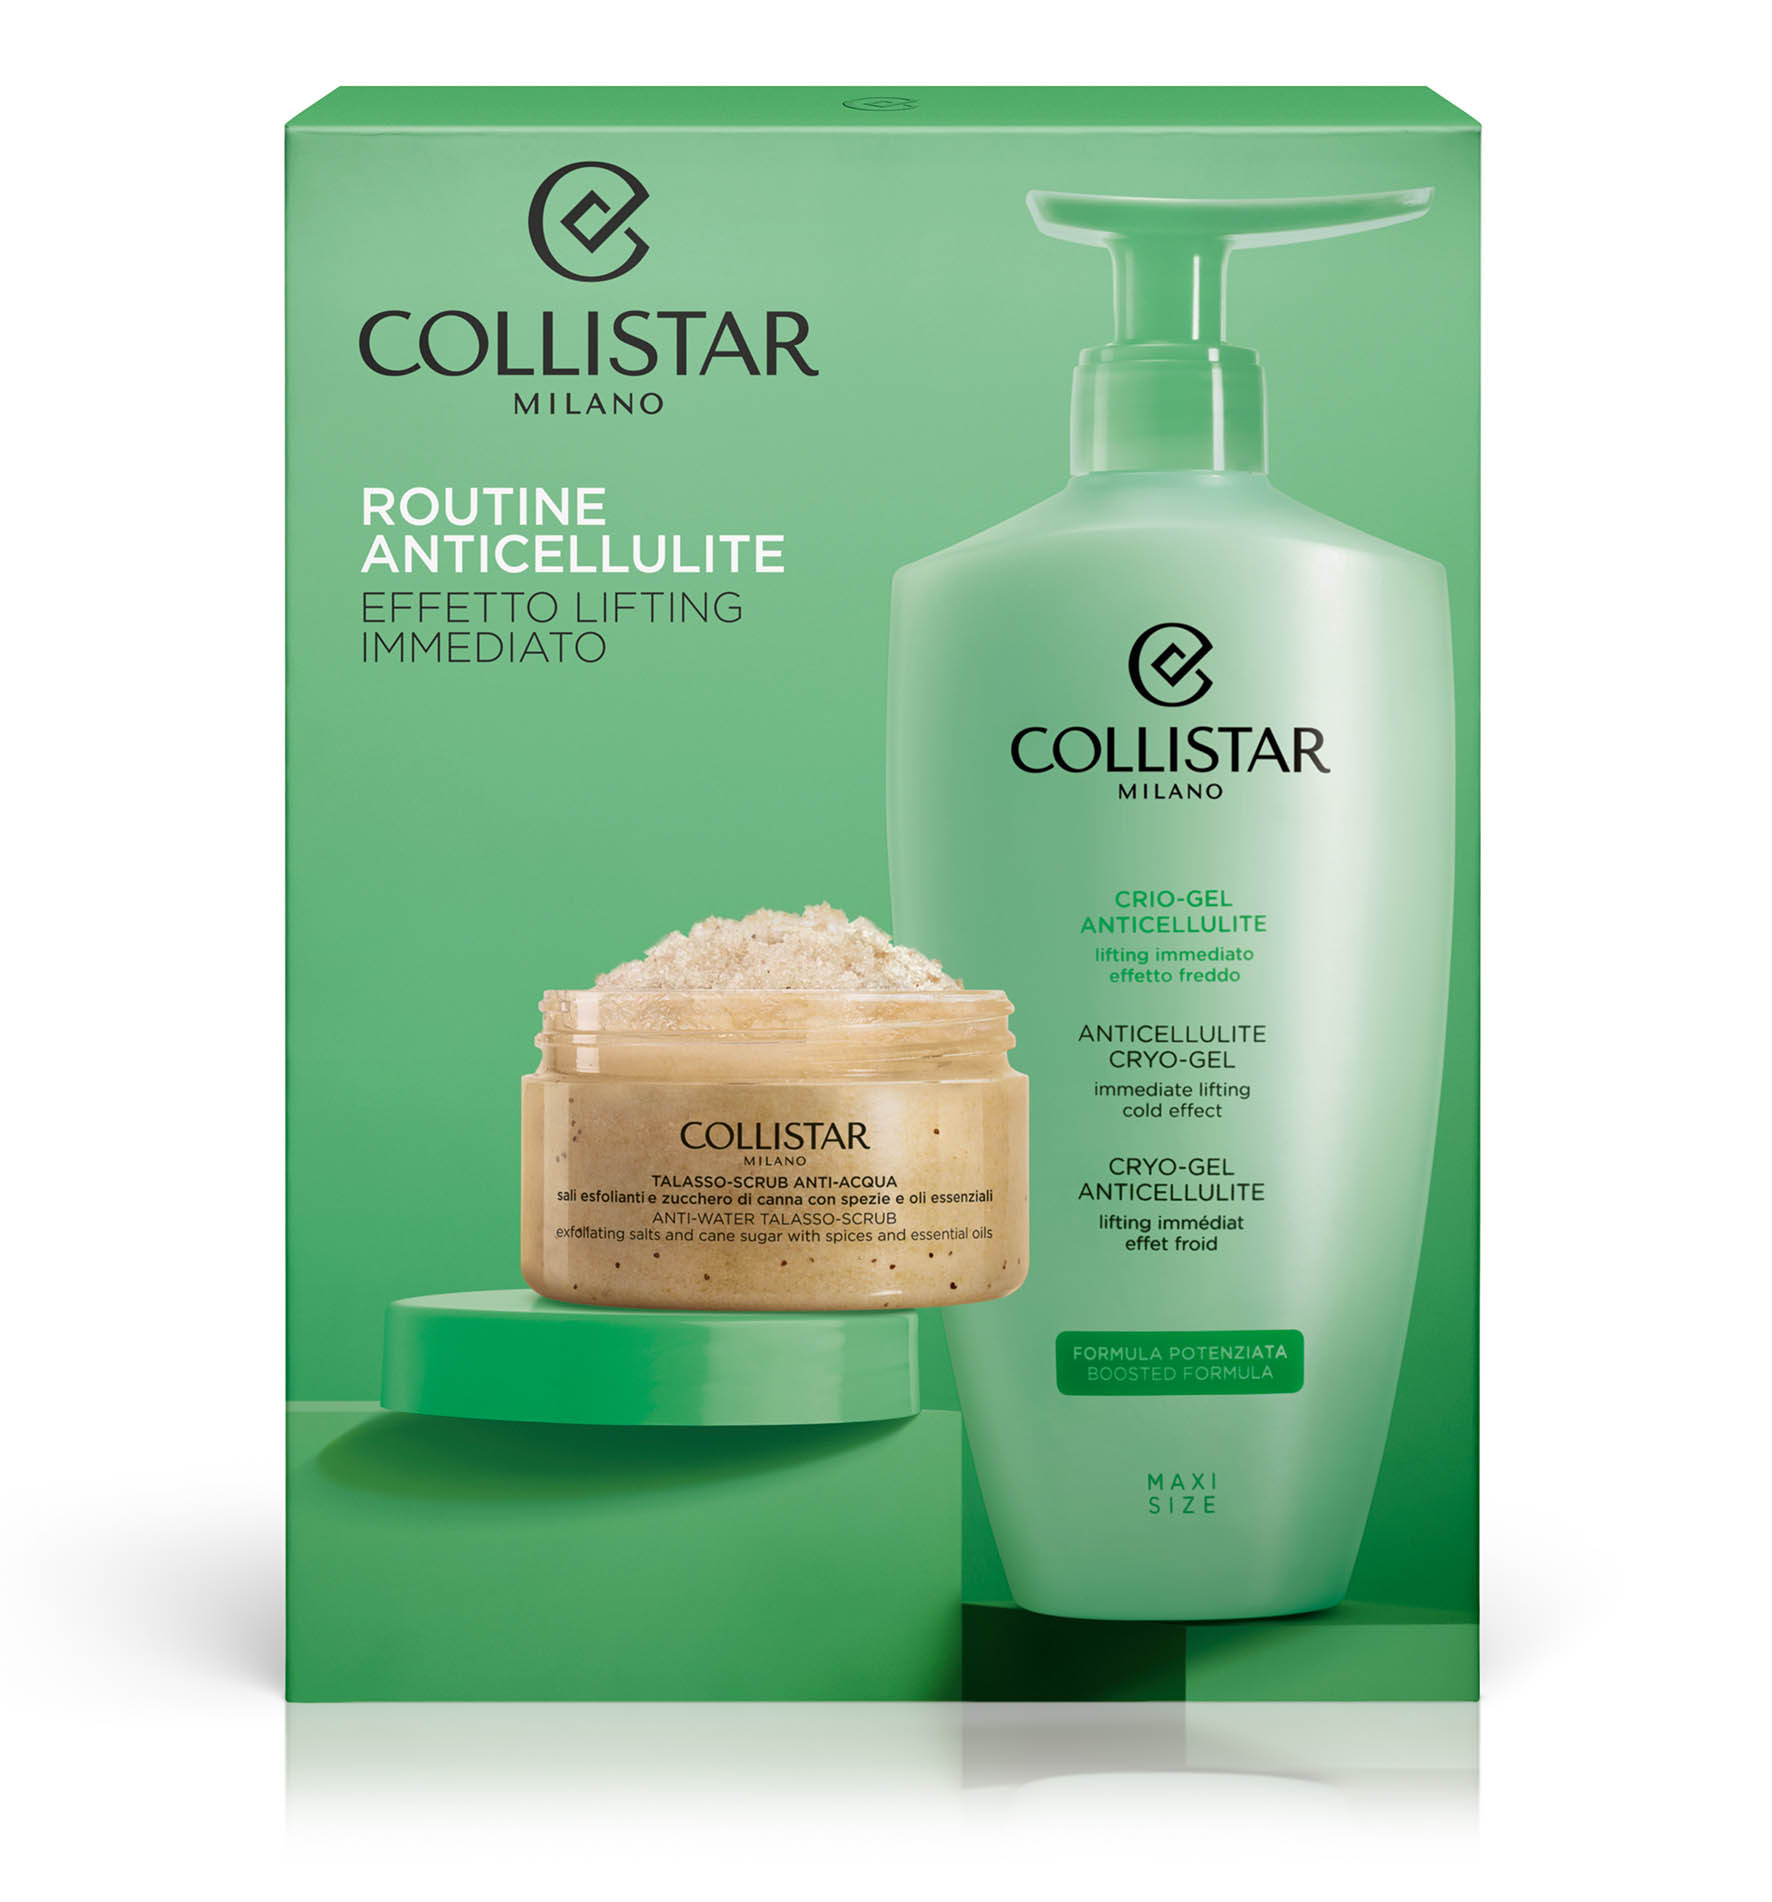 ANTICELLULITE ROUTINE IMMEDIATE LIFTING EFFECT - Body Promotion | Collistar - Shop Online Ufficiale